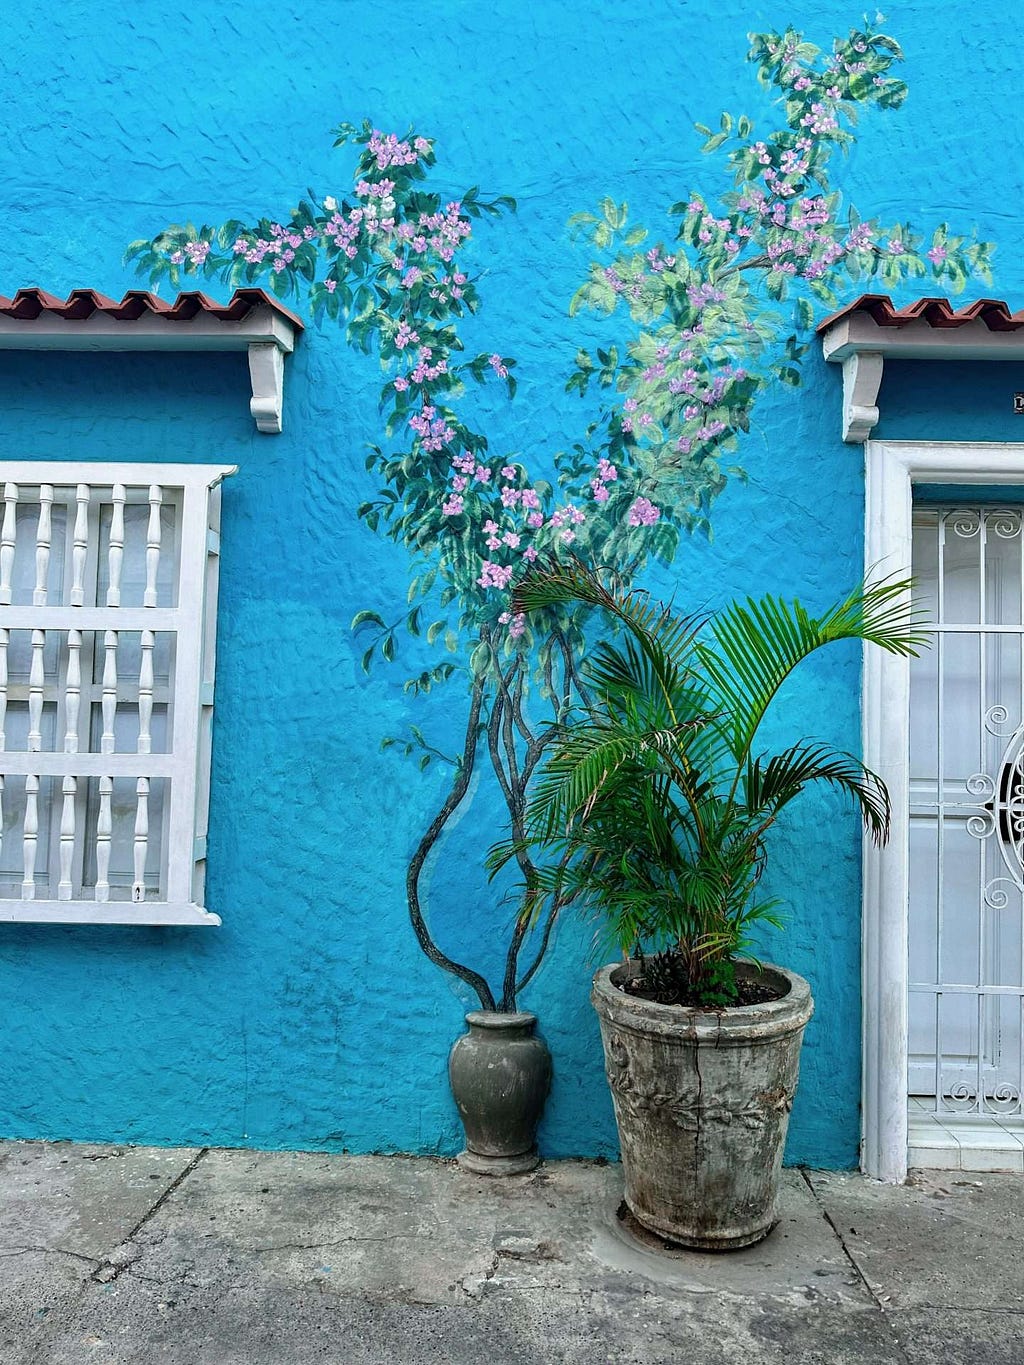 A vibrant blue wall in the Getsamani neighborhood of Cartagena, Colombia features a mural of flowering vines, with two real potted plants placed in front. A white window with bars and a white door with a decorative iron grille are also visible.